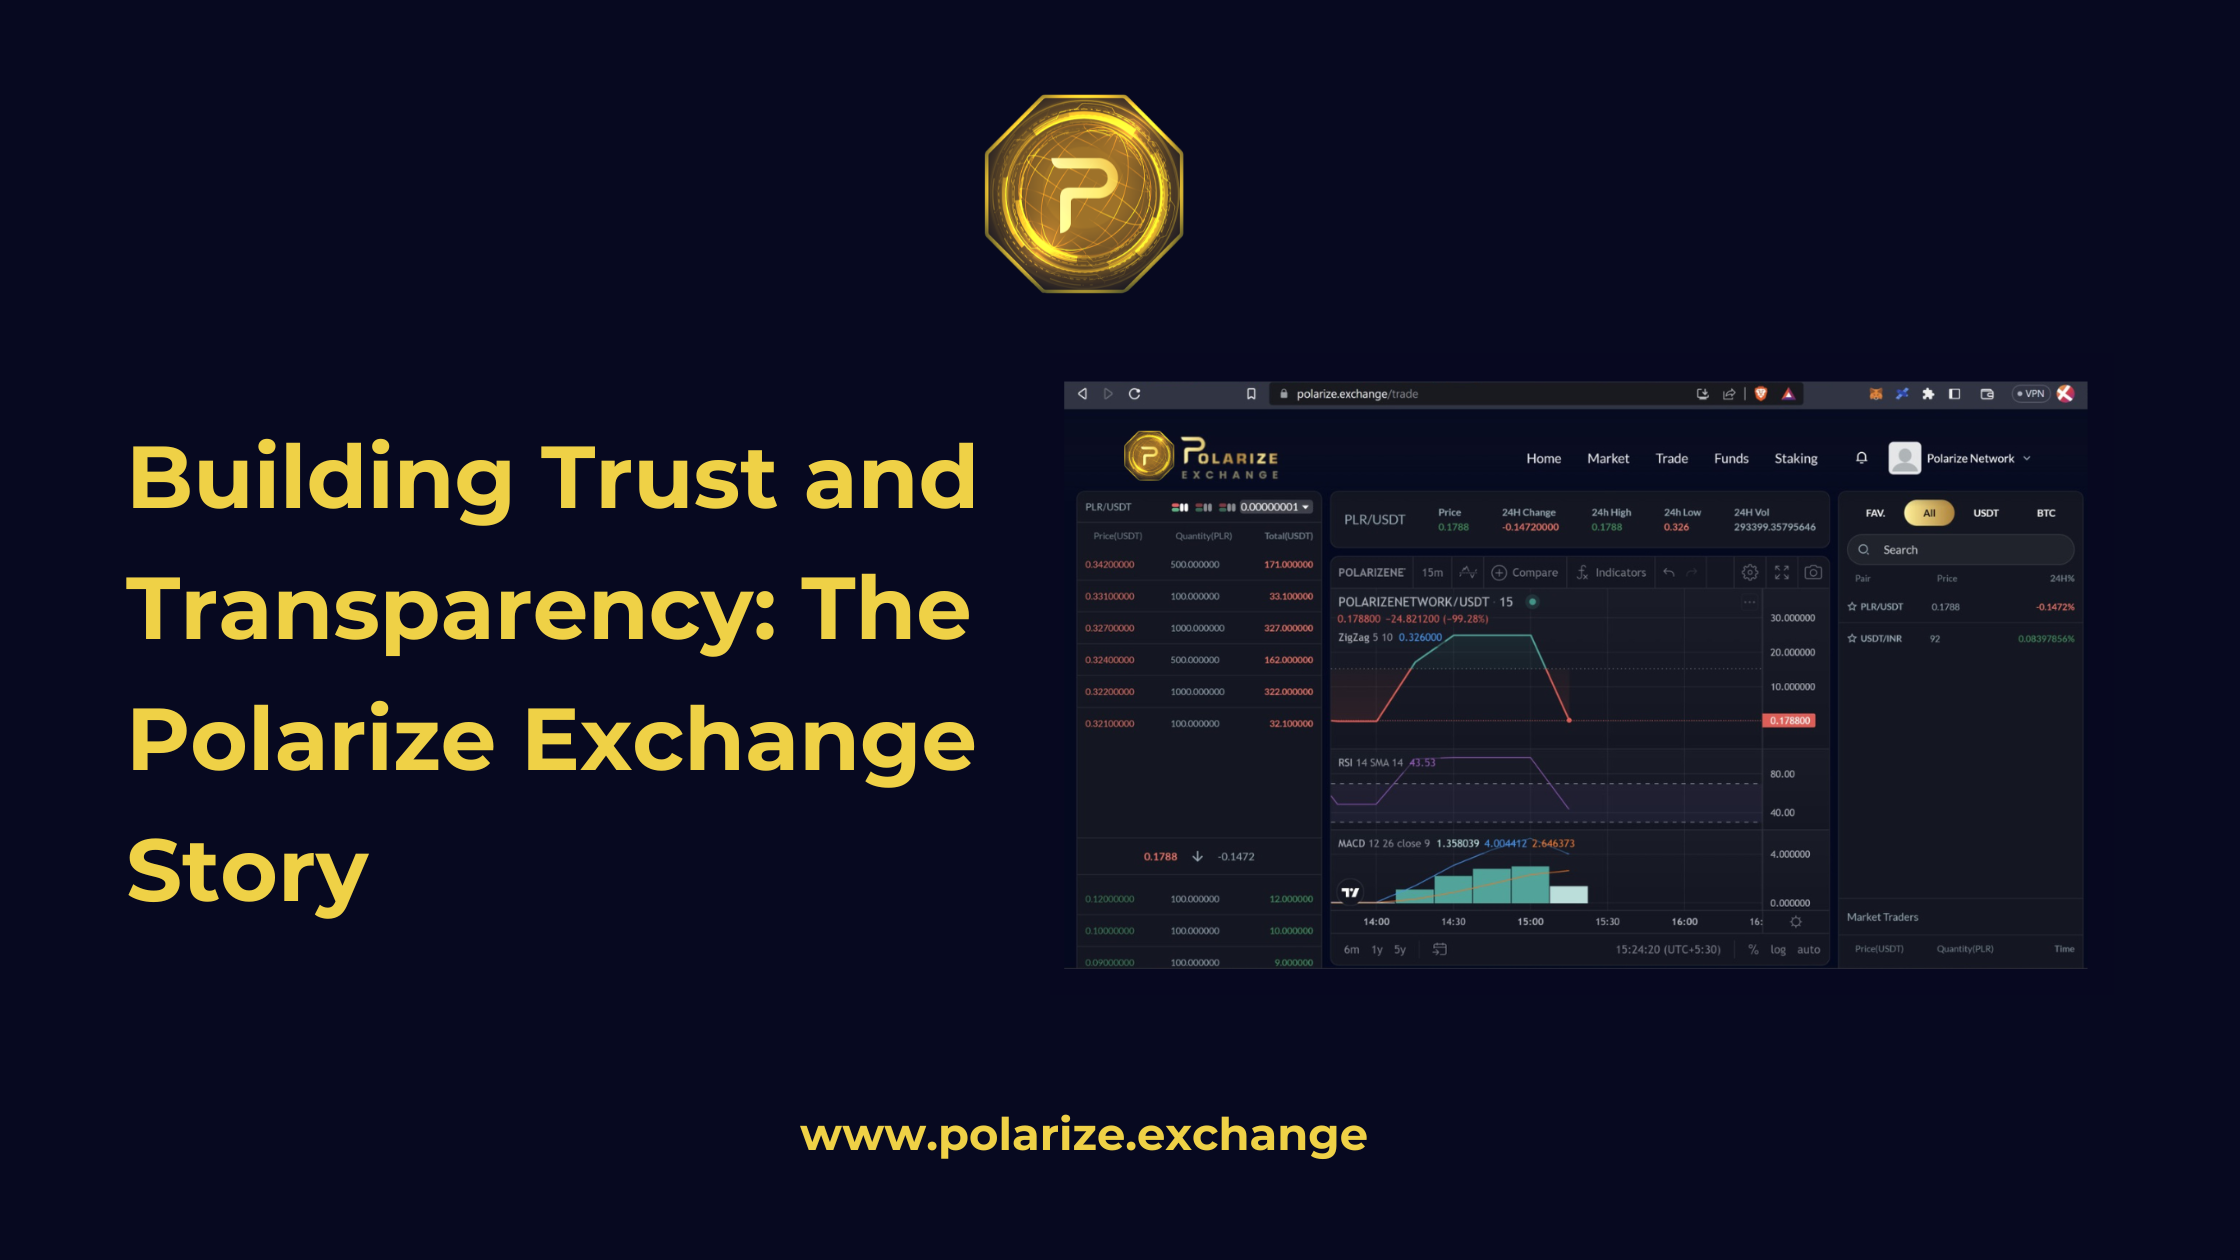 Building Trust and Transparency: The Polarize Exchange Story